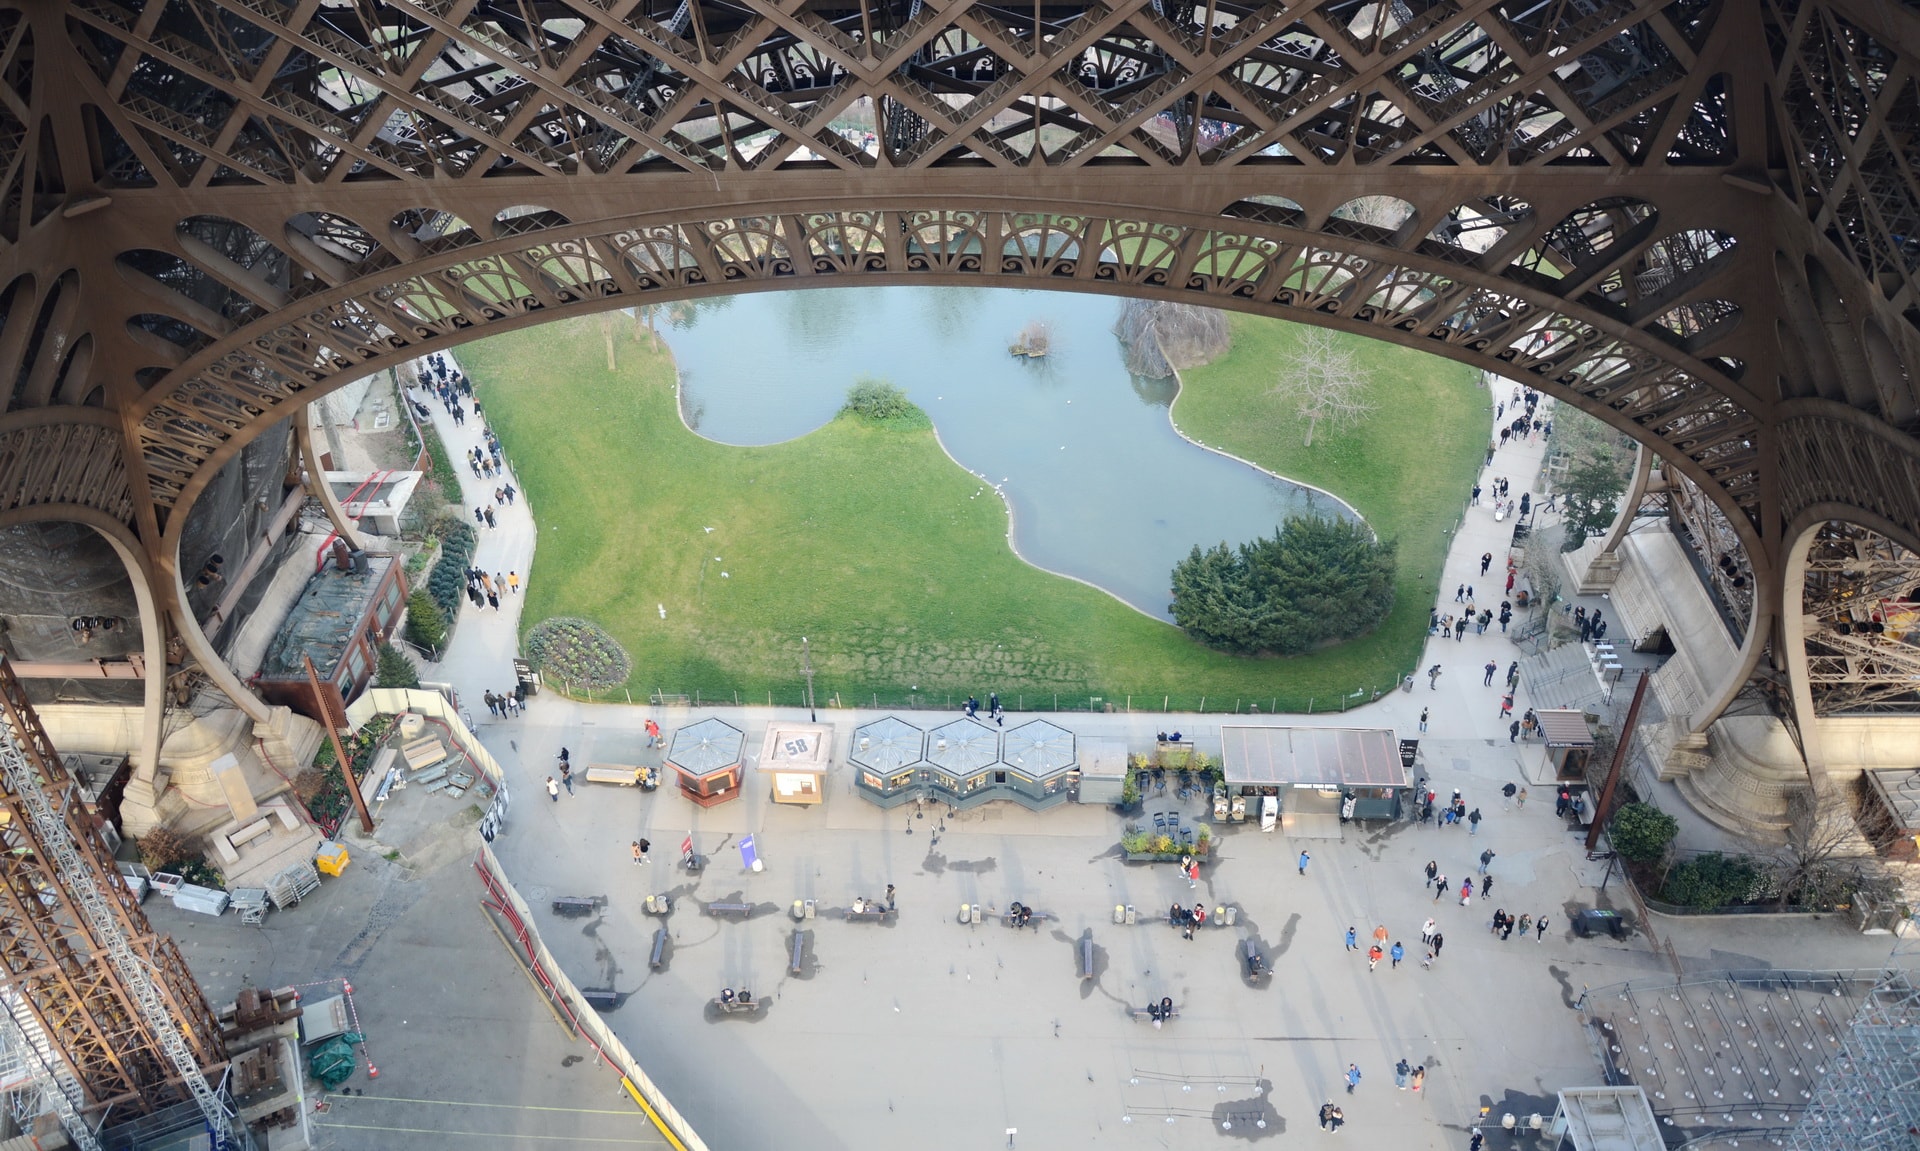 The 1st floor of the Eiffel Tower has a café on it and also part with glass floor